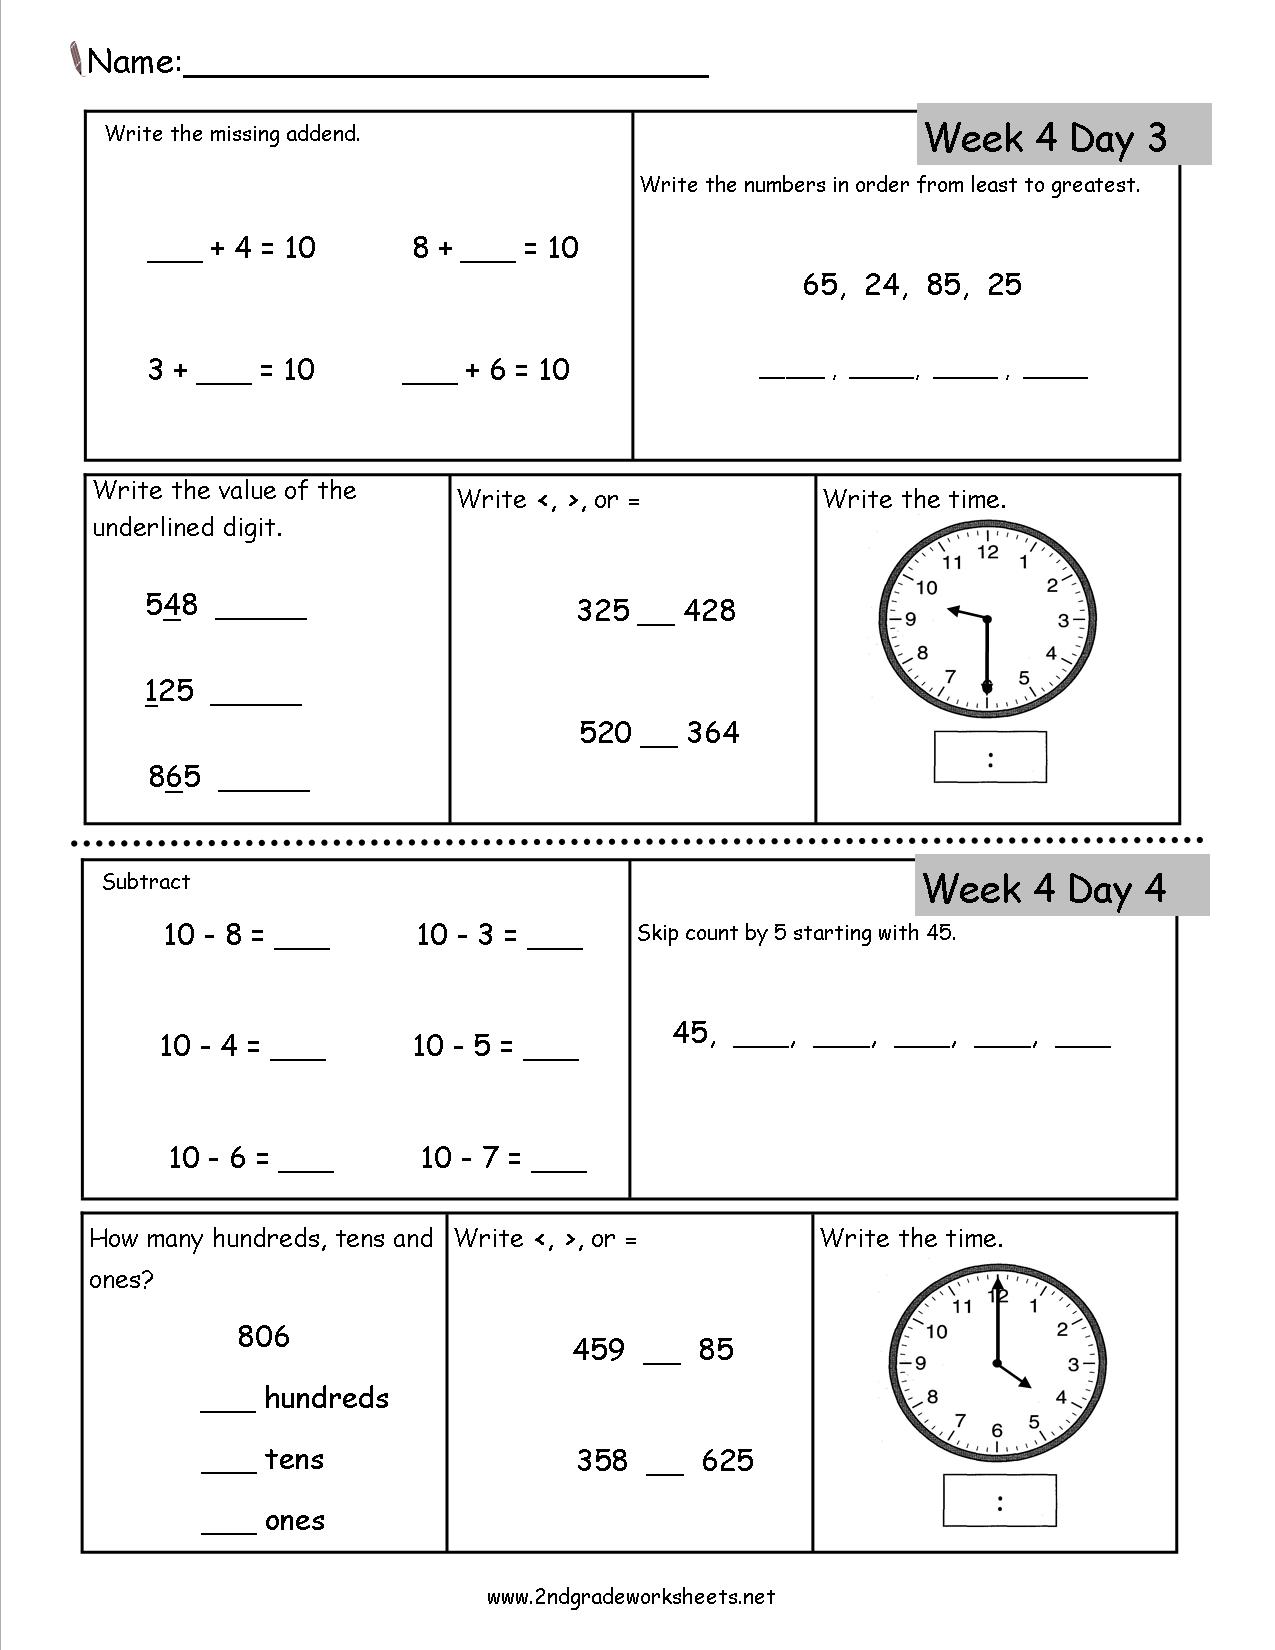 13-best-images-of-printable-music-worksheets-free-printable-music-history-worksheets-teaching